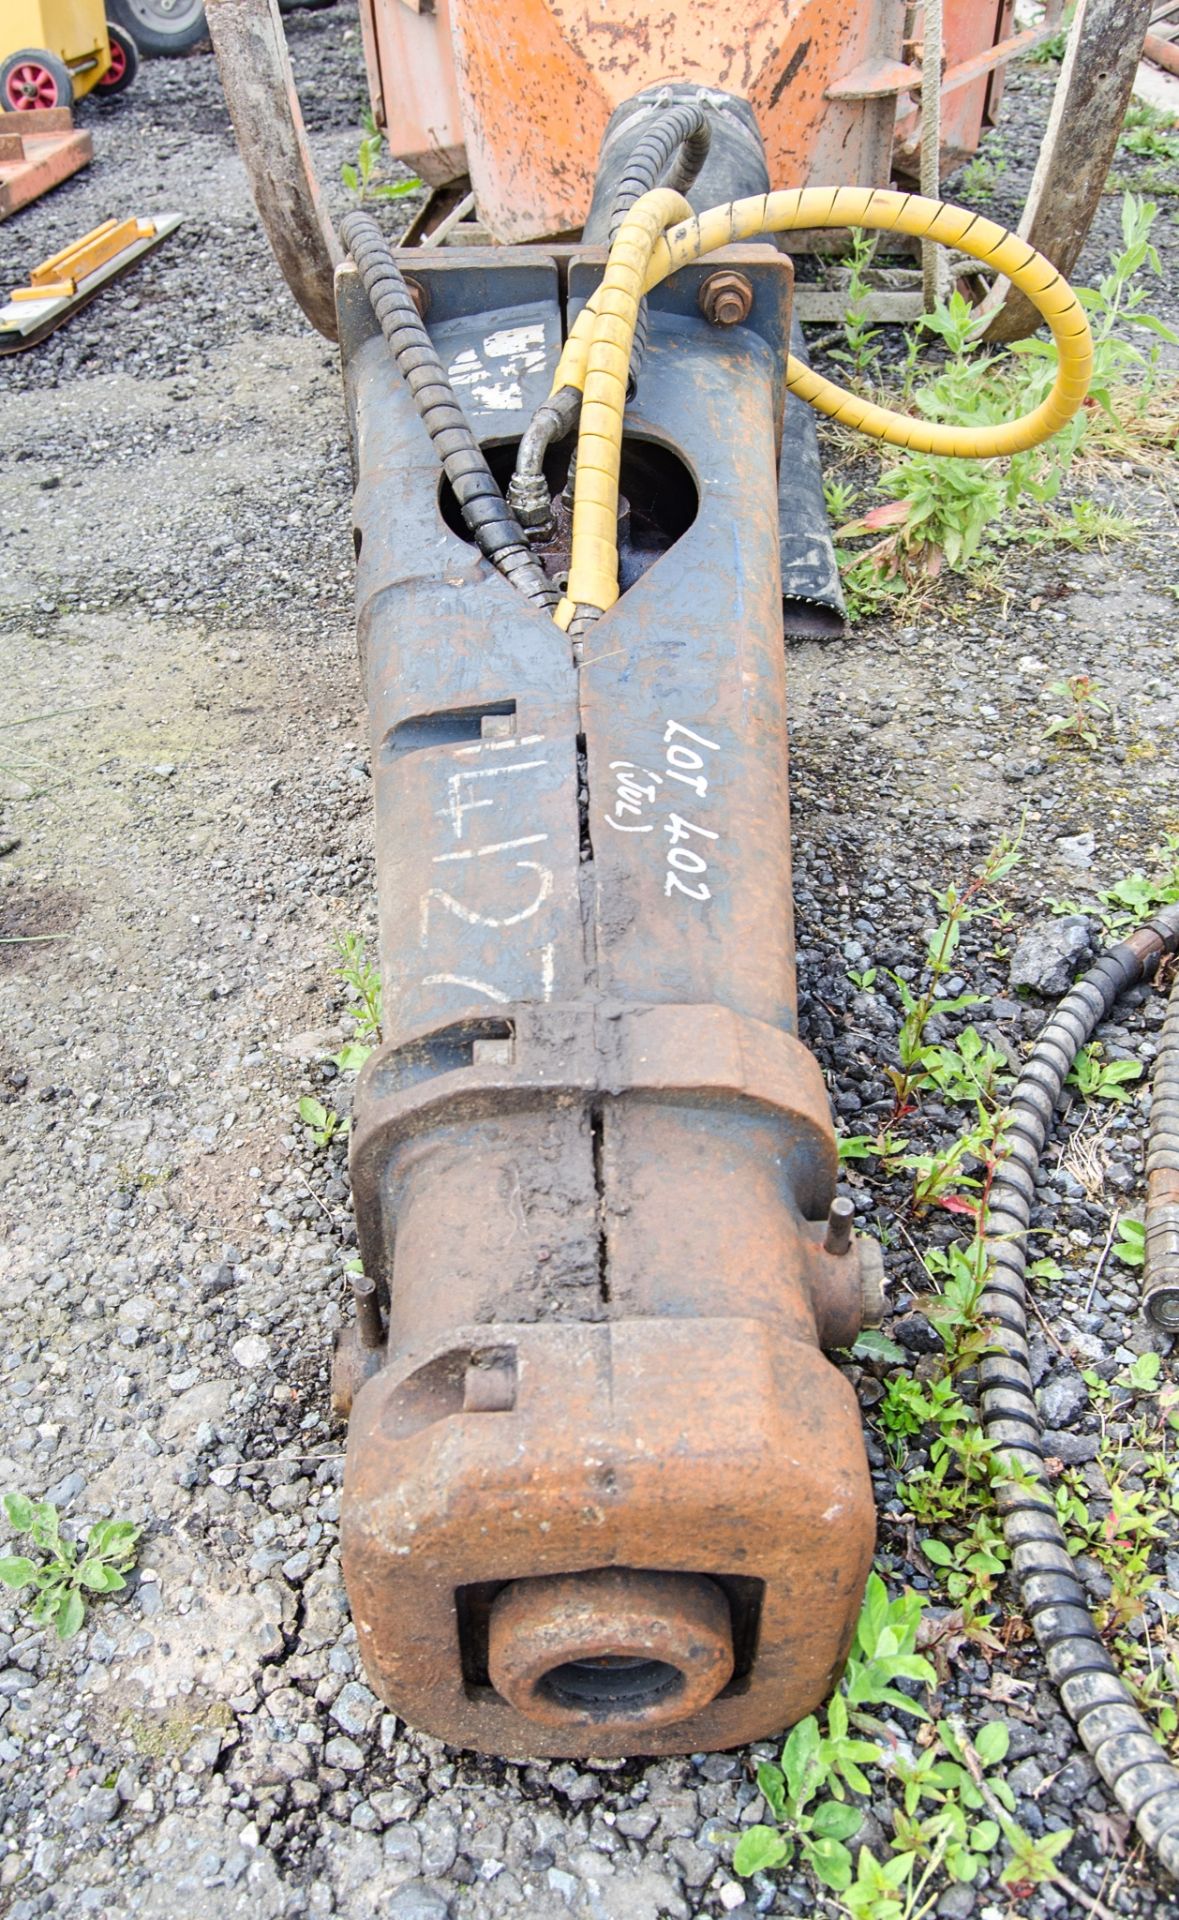 Hydraulic breaker to suit 3 tonne excavator Pin diameter: 35mm Pin centres: 140mm Pin width: 110mm - Image 3 of 4